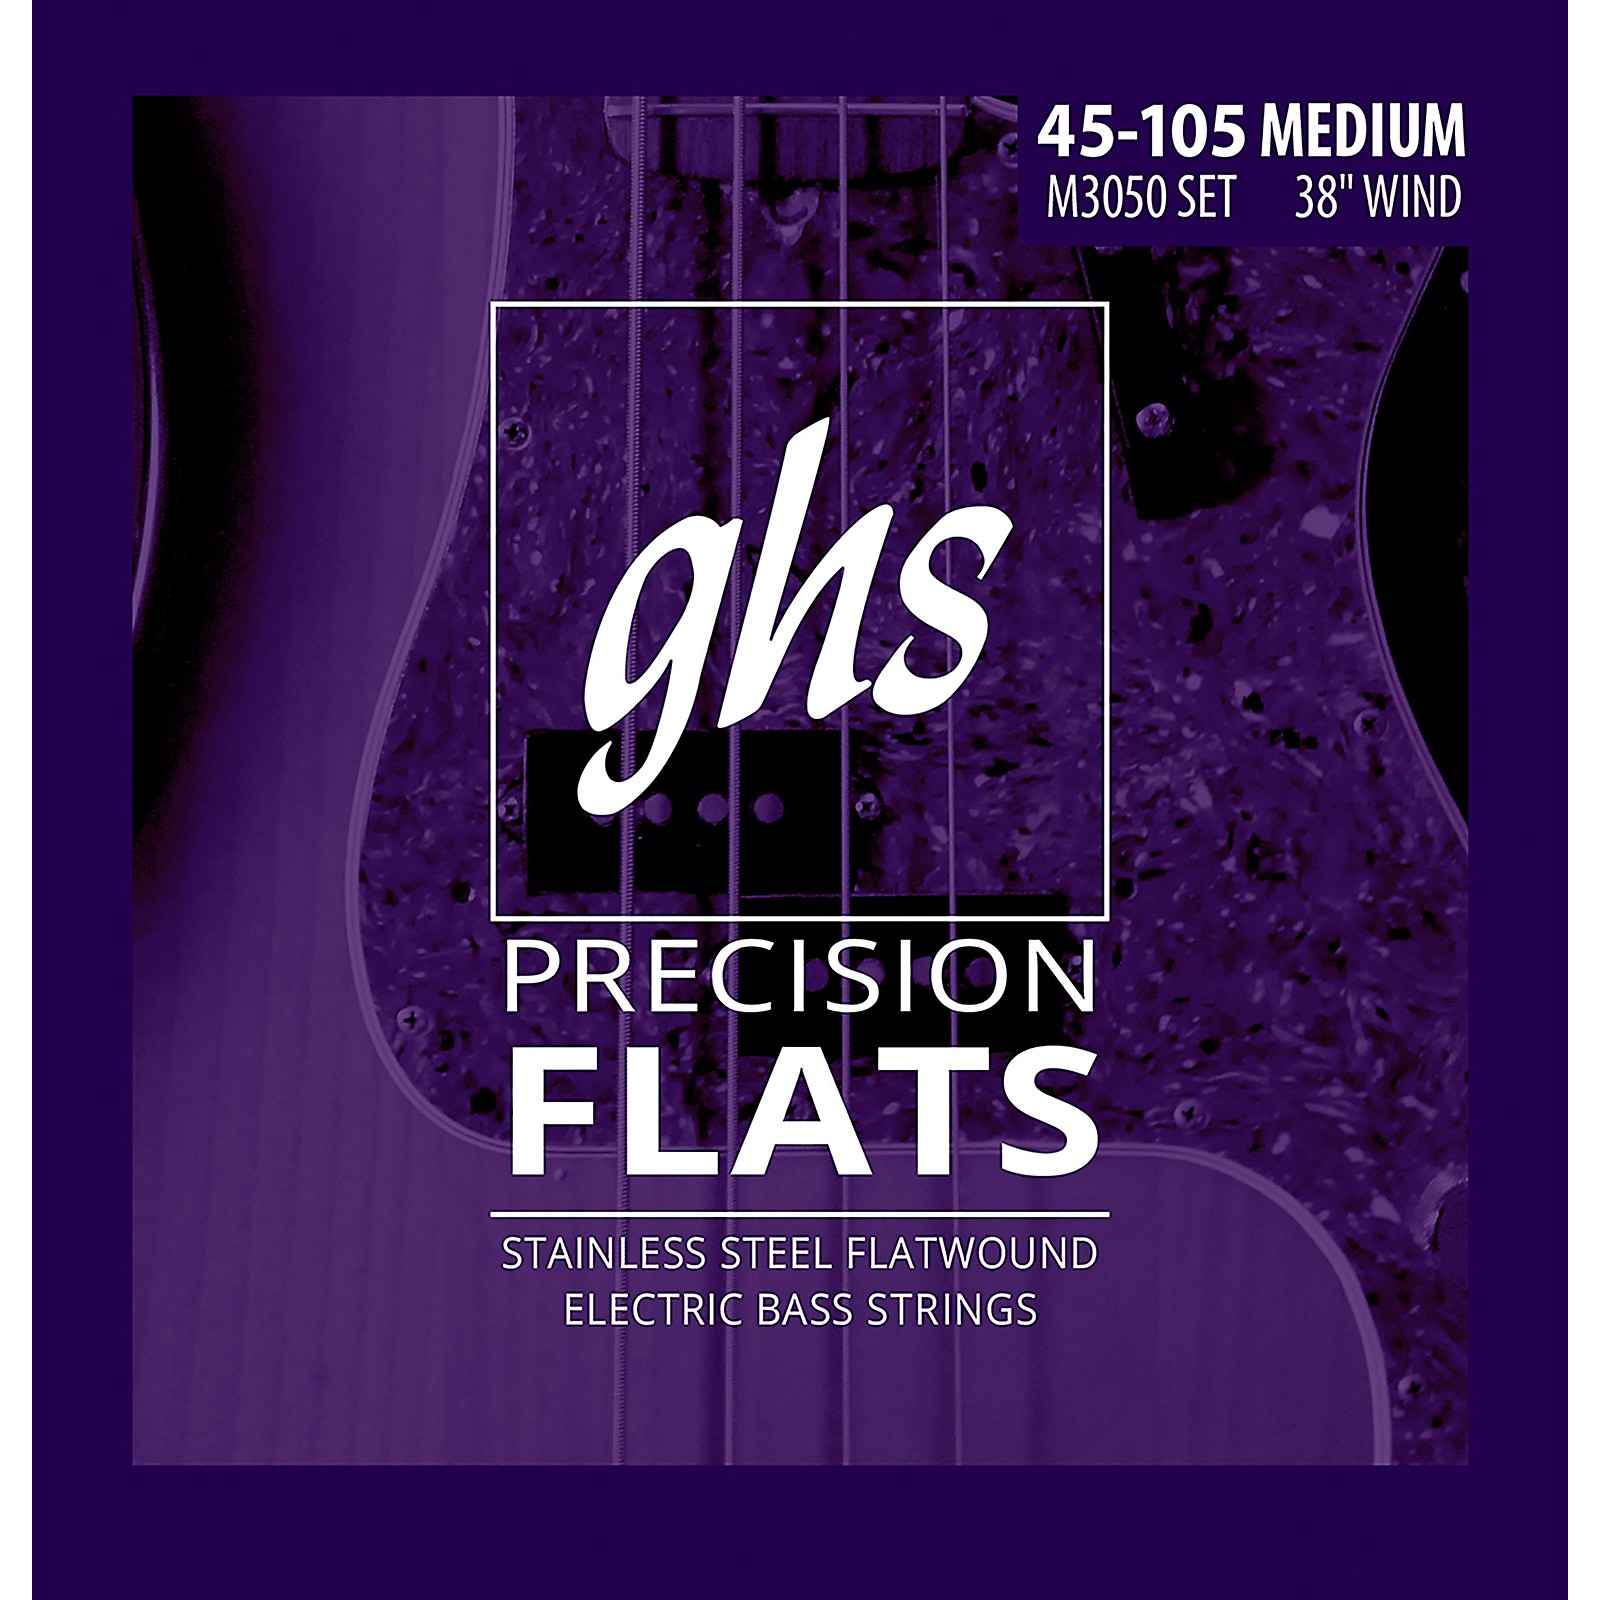 Stainless Steel Flat Wound Bass Strings Long Scale Plus .045-.105 GHS Strings M3050 4-String Precision Flatwound 